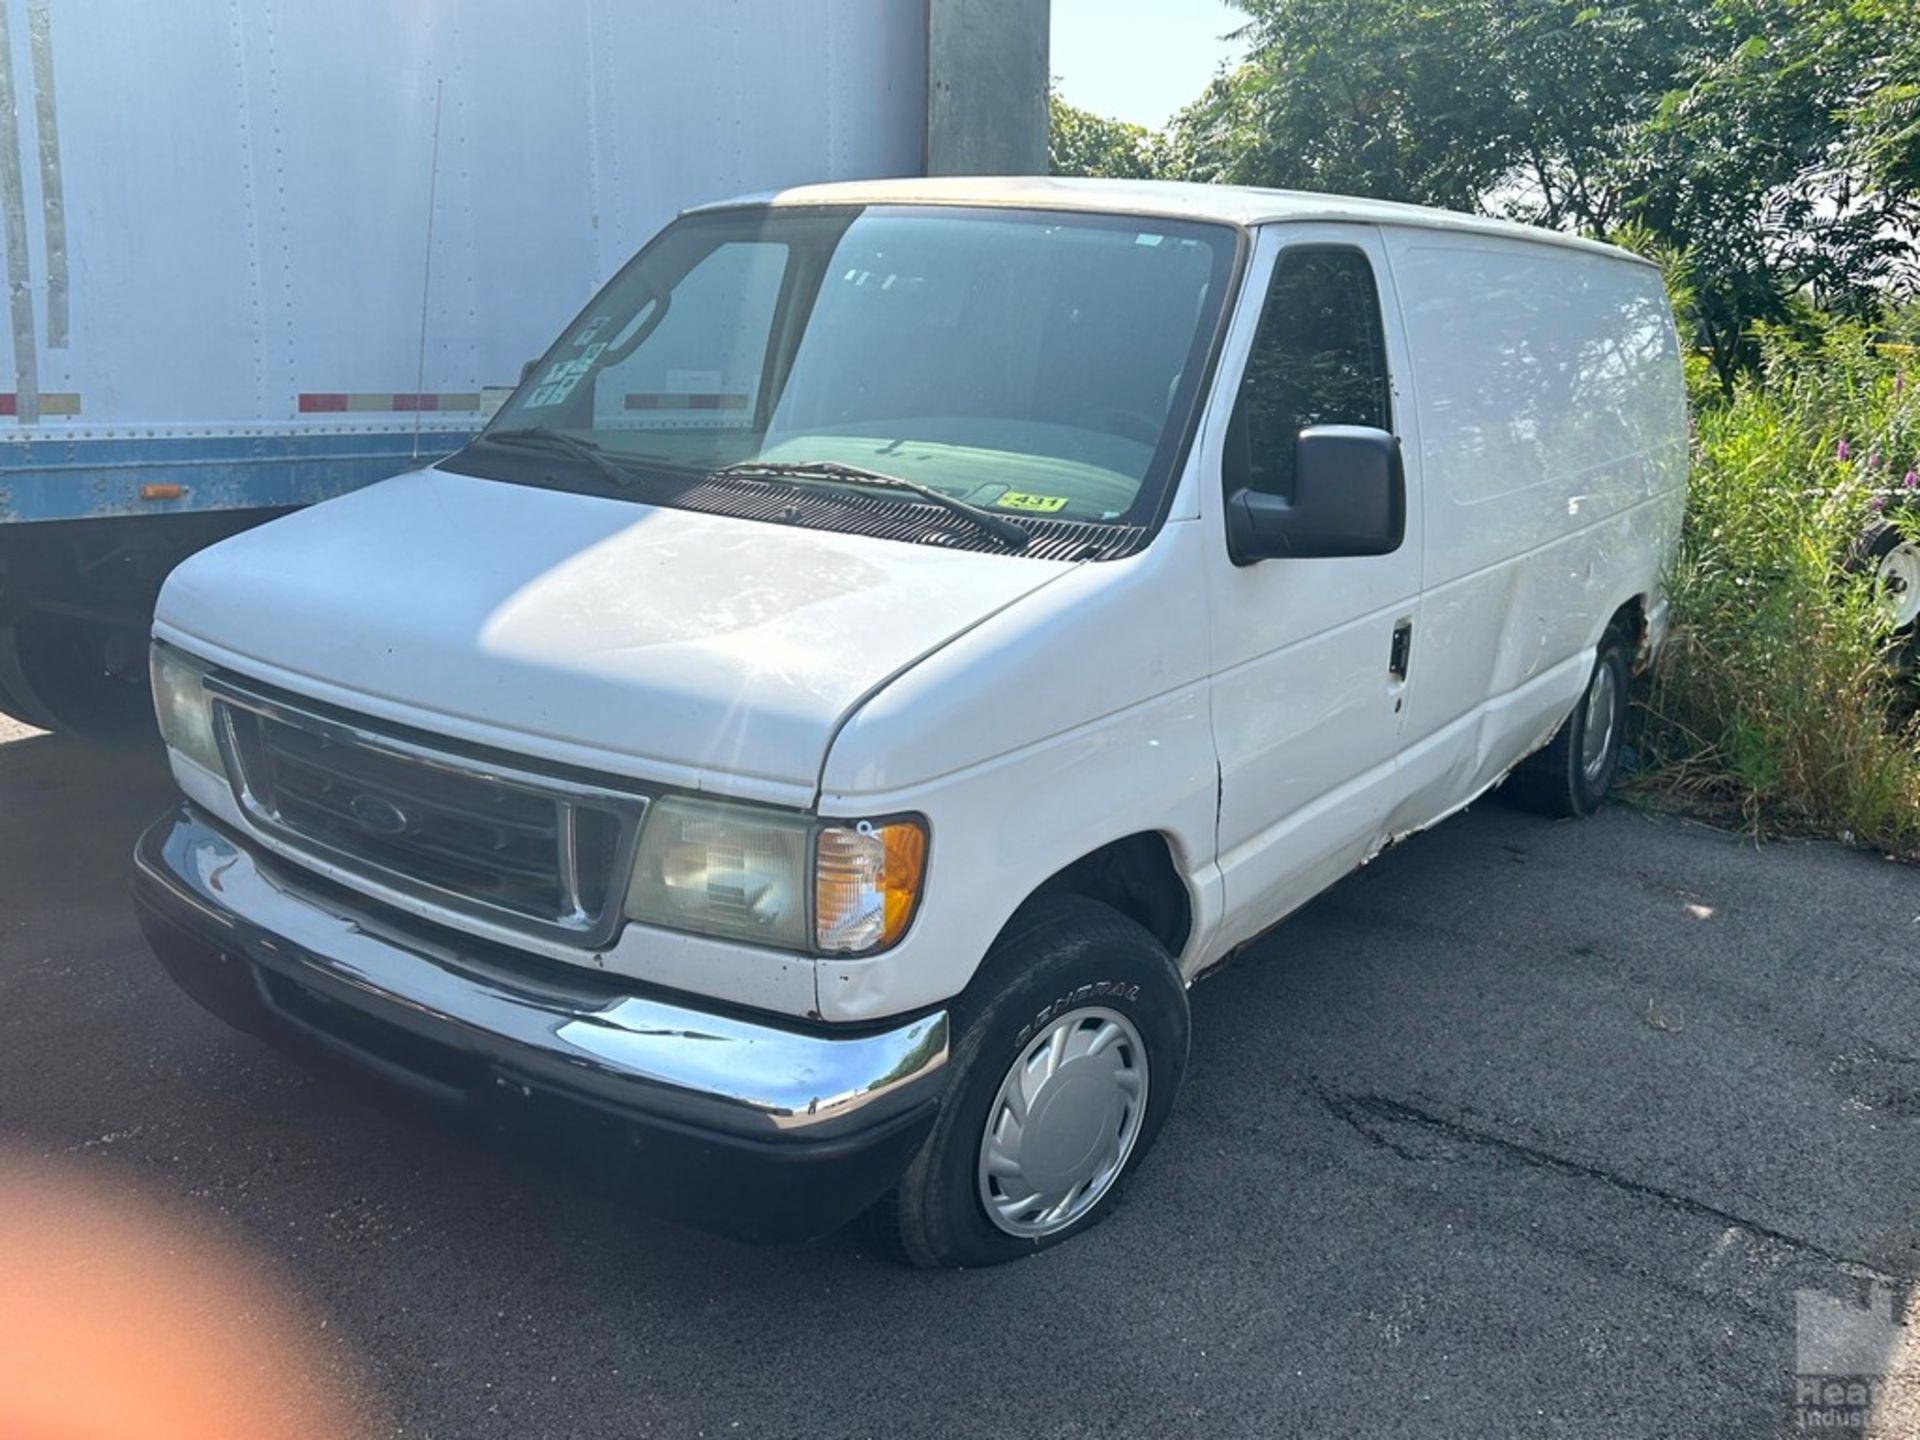 2002 FORD E150 VAN VIN: 1FTRE14253HA58959 369, 389 MILES V6 GAS 2WD NOT RUNNING WITH TITLE AND KEYS